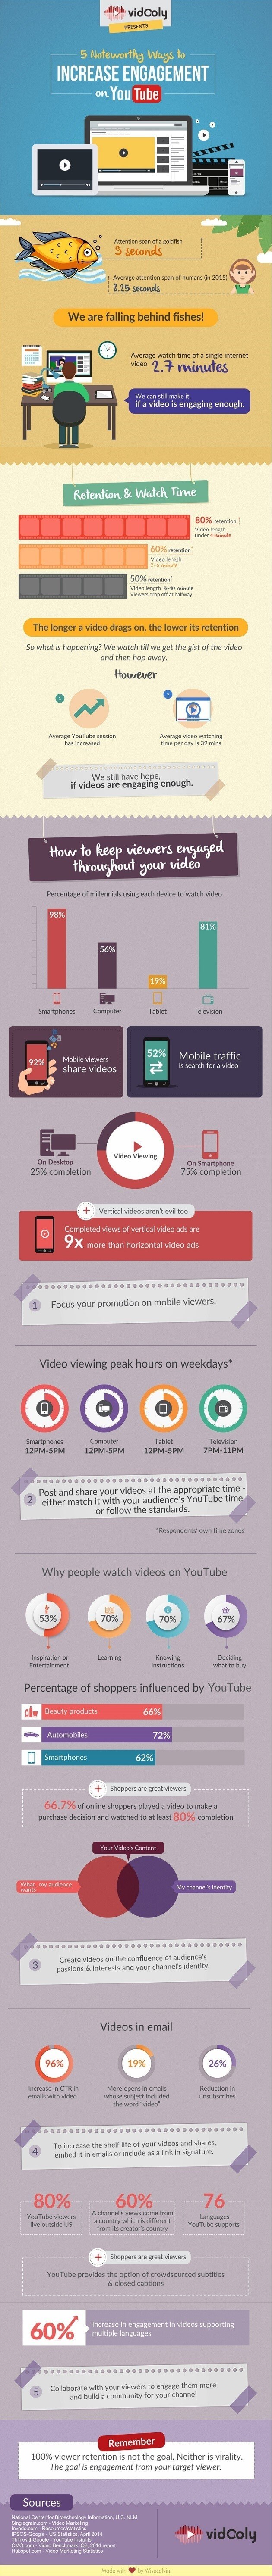 5 easy ways to increase viewer engagement on YouTube